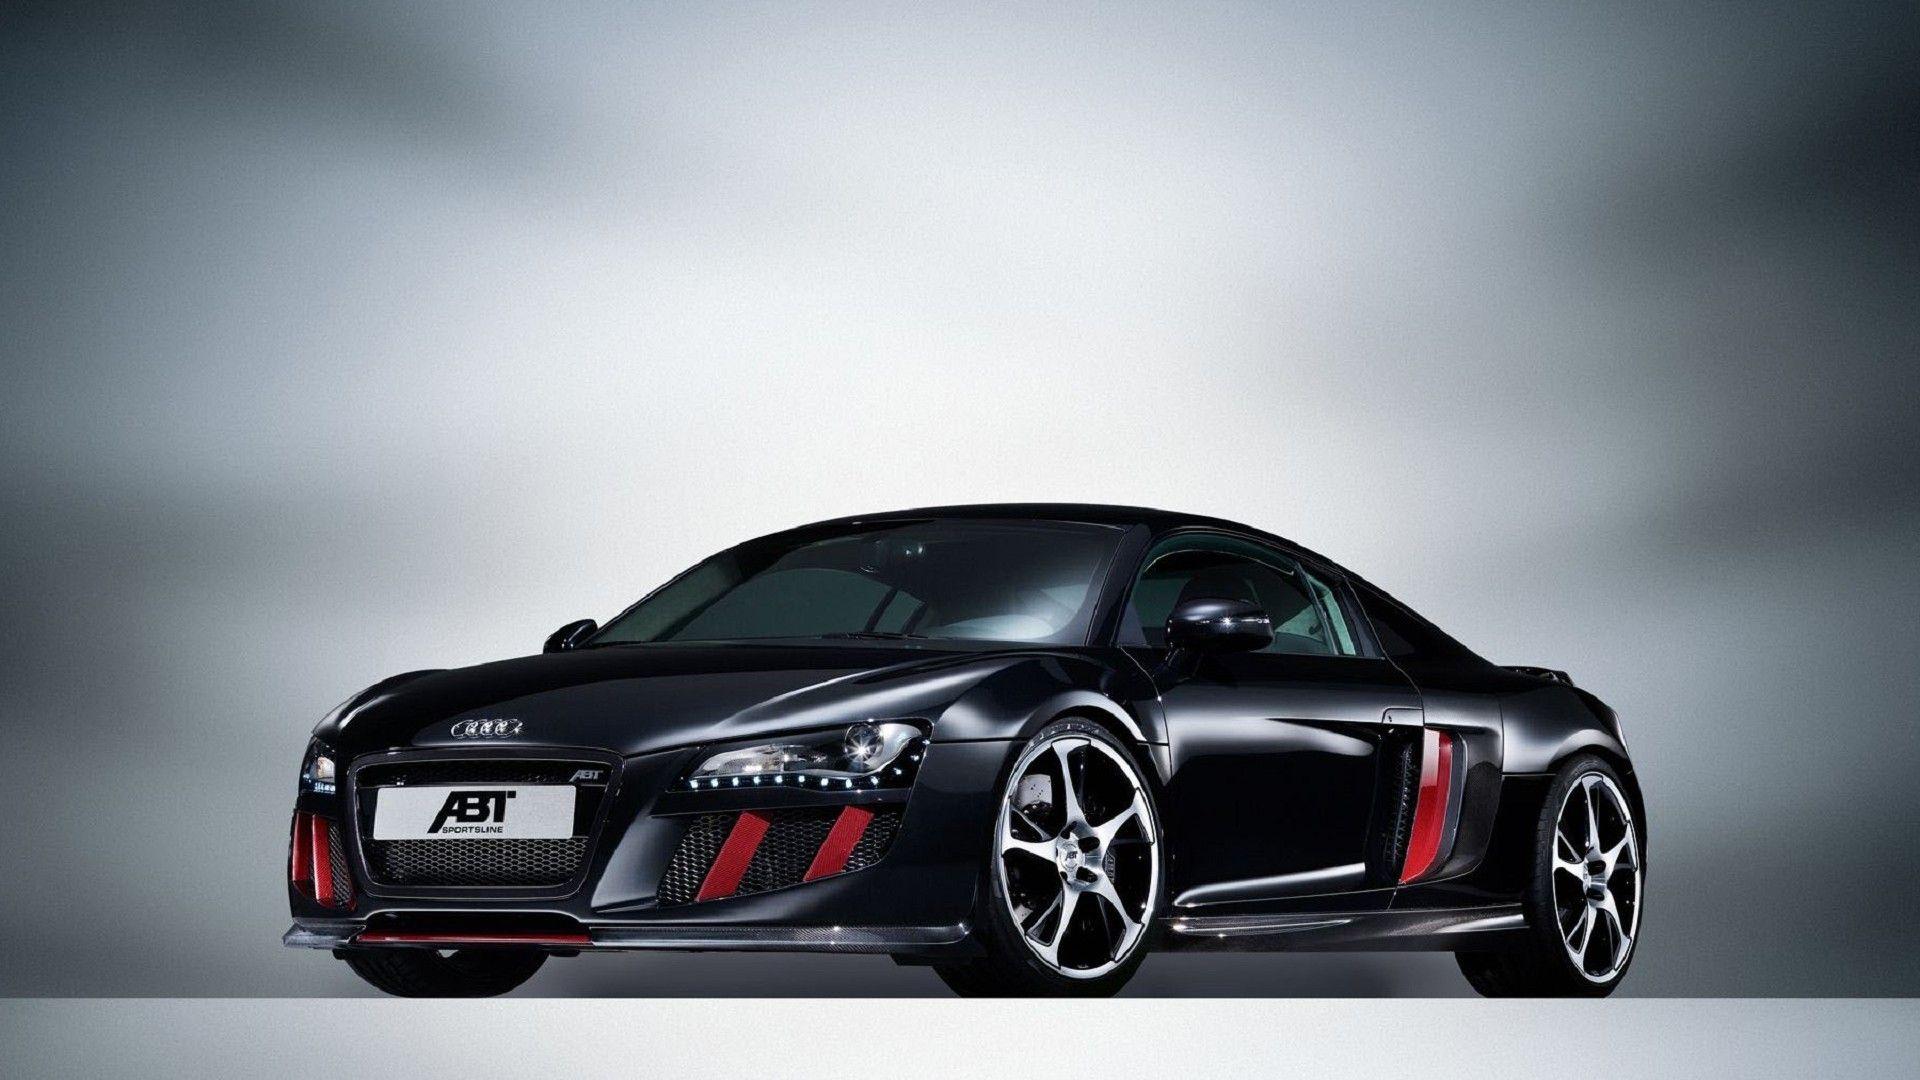 Black Audi R8 Logo - so badly want an Audi R8 if I can't get a Lotus Elise